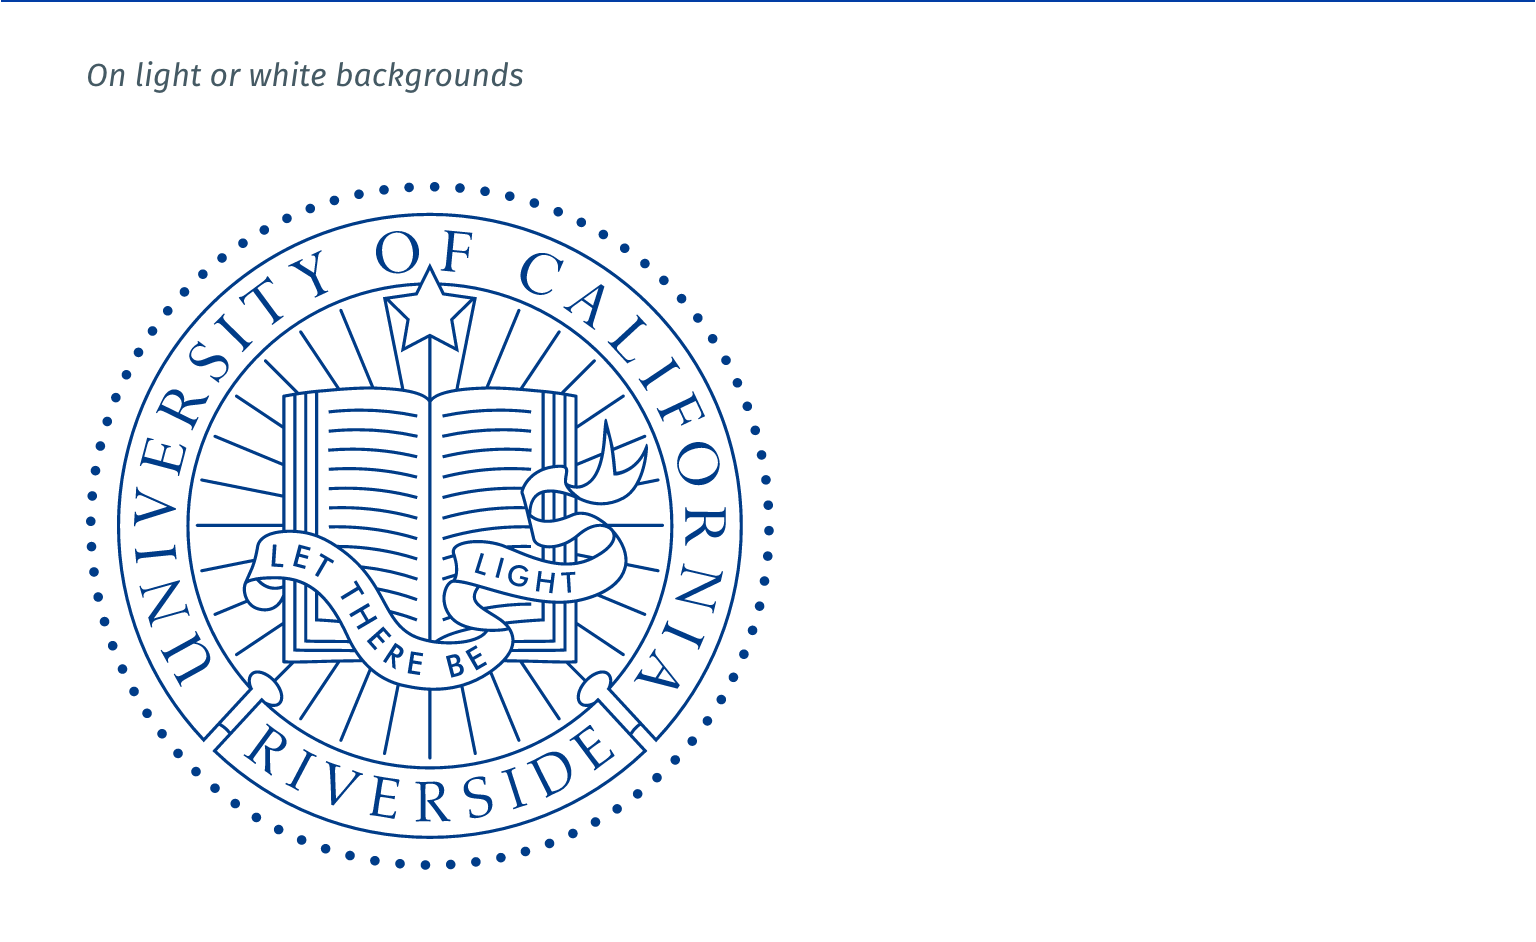 UCR Seal on White Background